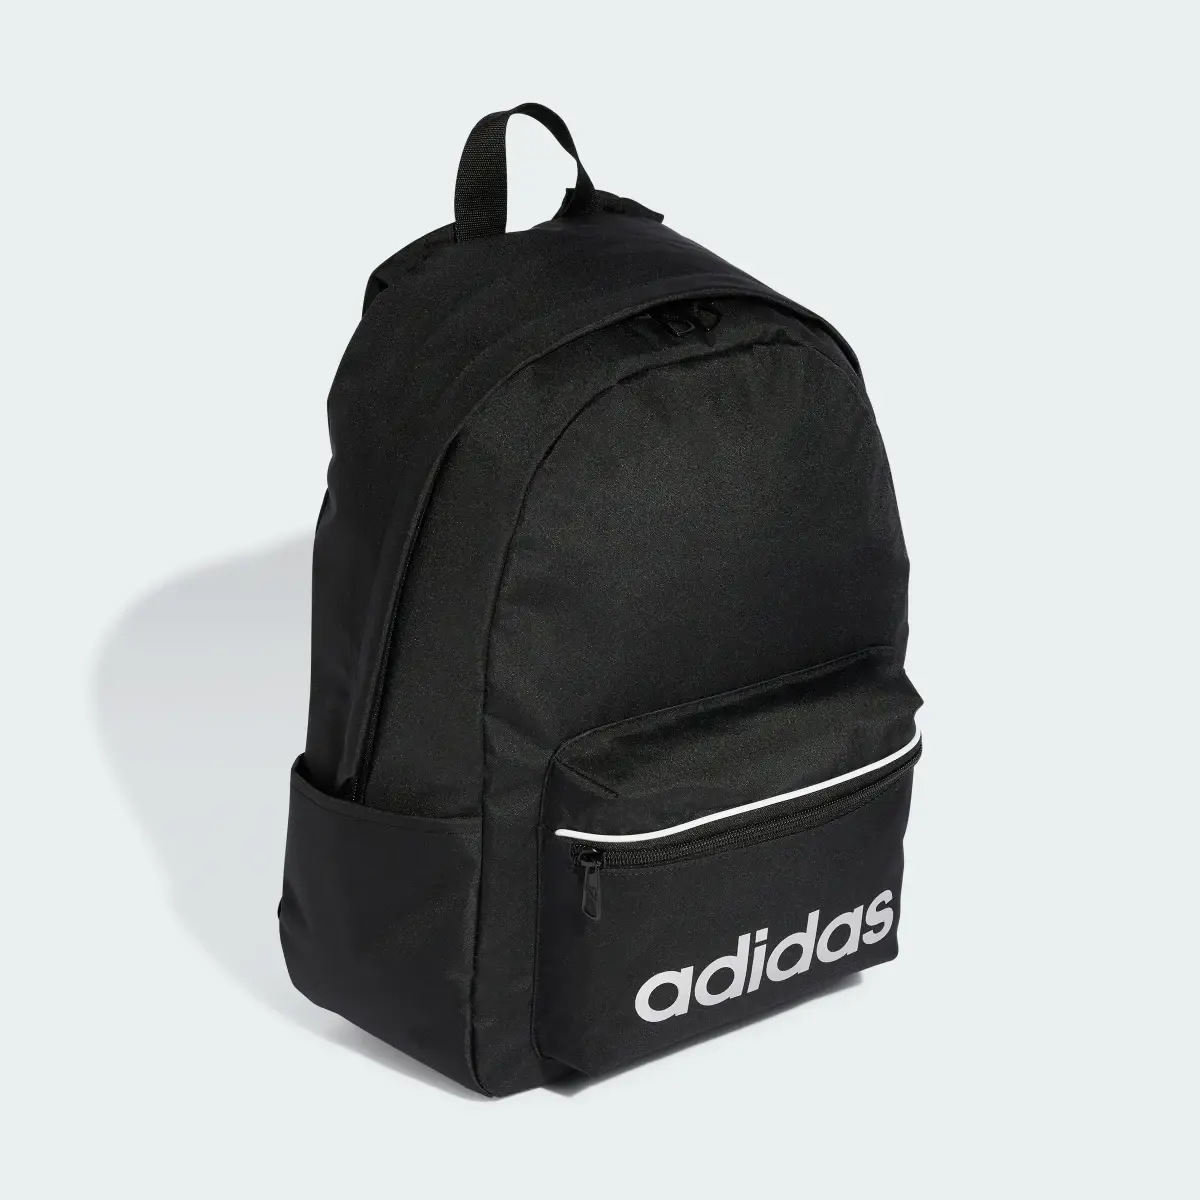 Adidas Linear Essentials Backpack. 2